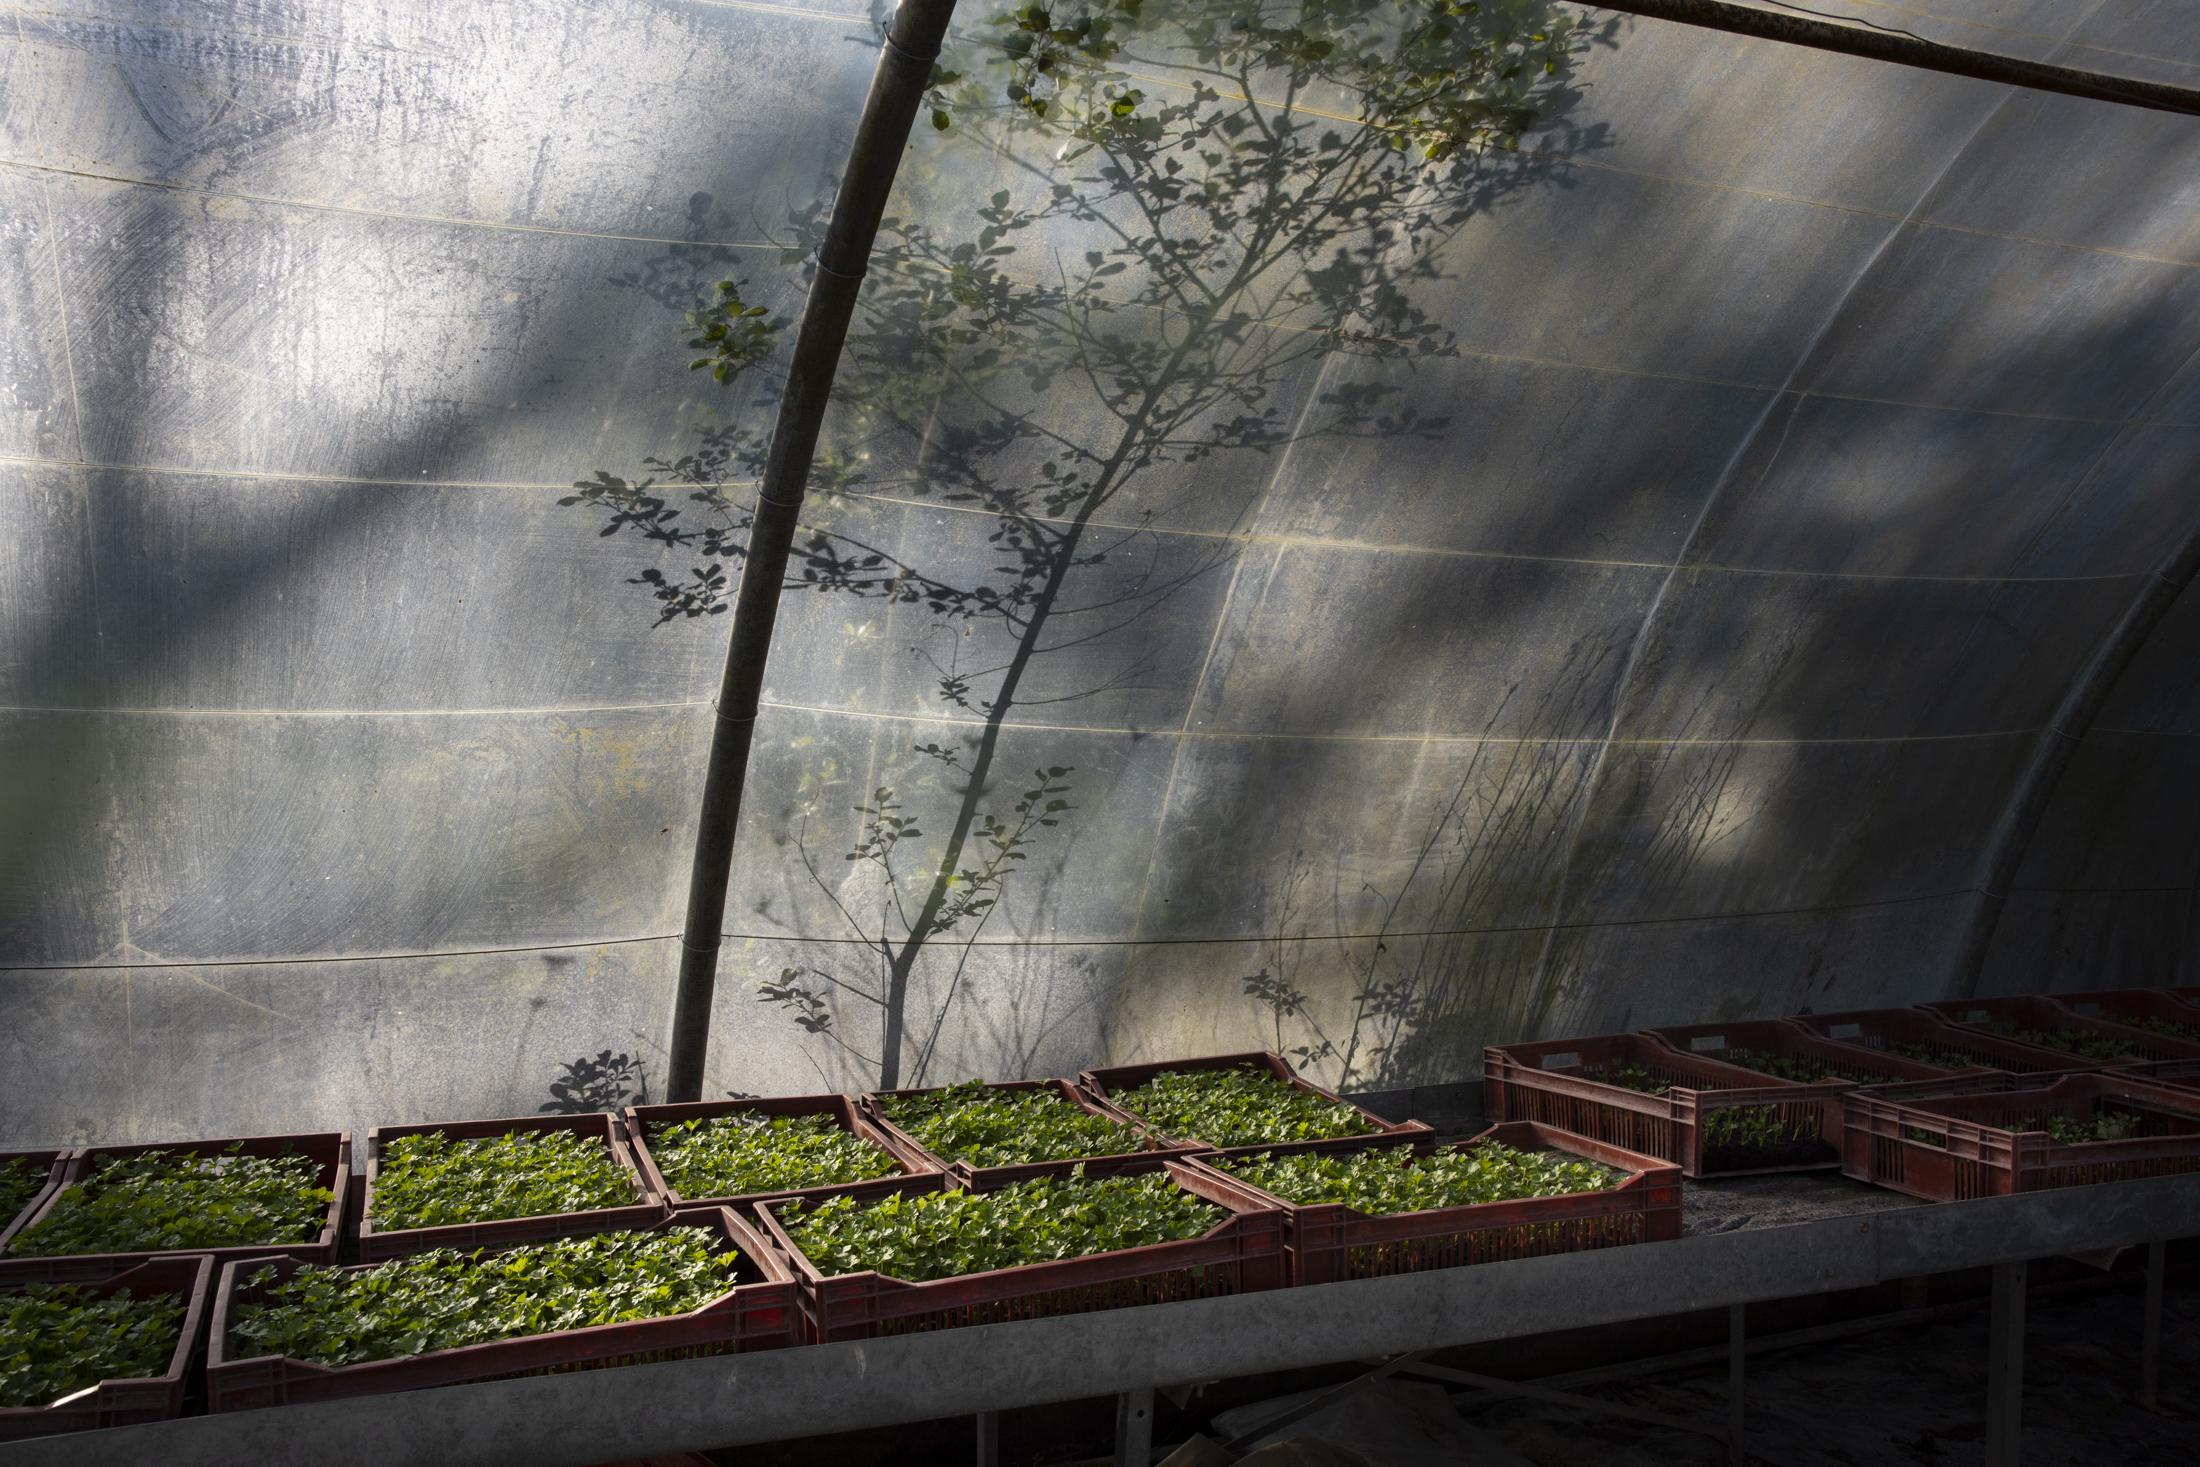 The greenhouse of La Ferme des Millonets, with the fleas that will be planted for this summer&#39;s harvest. Mantes la Jolie, Ile de France, France, April 2020